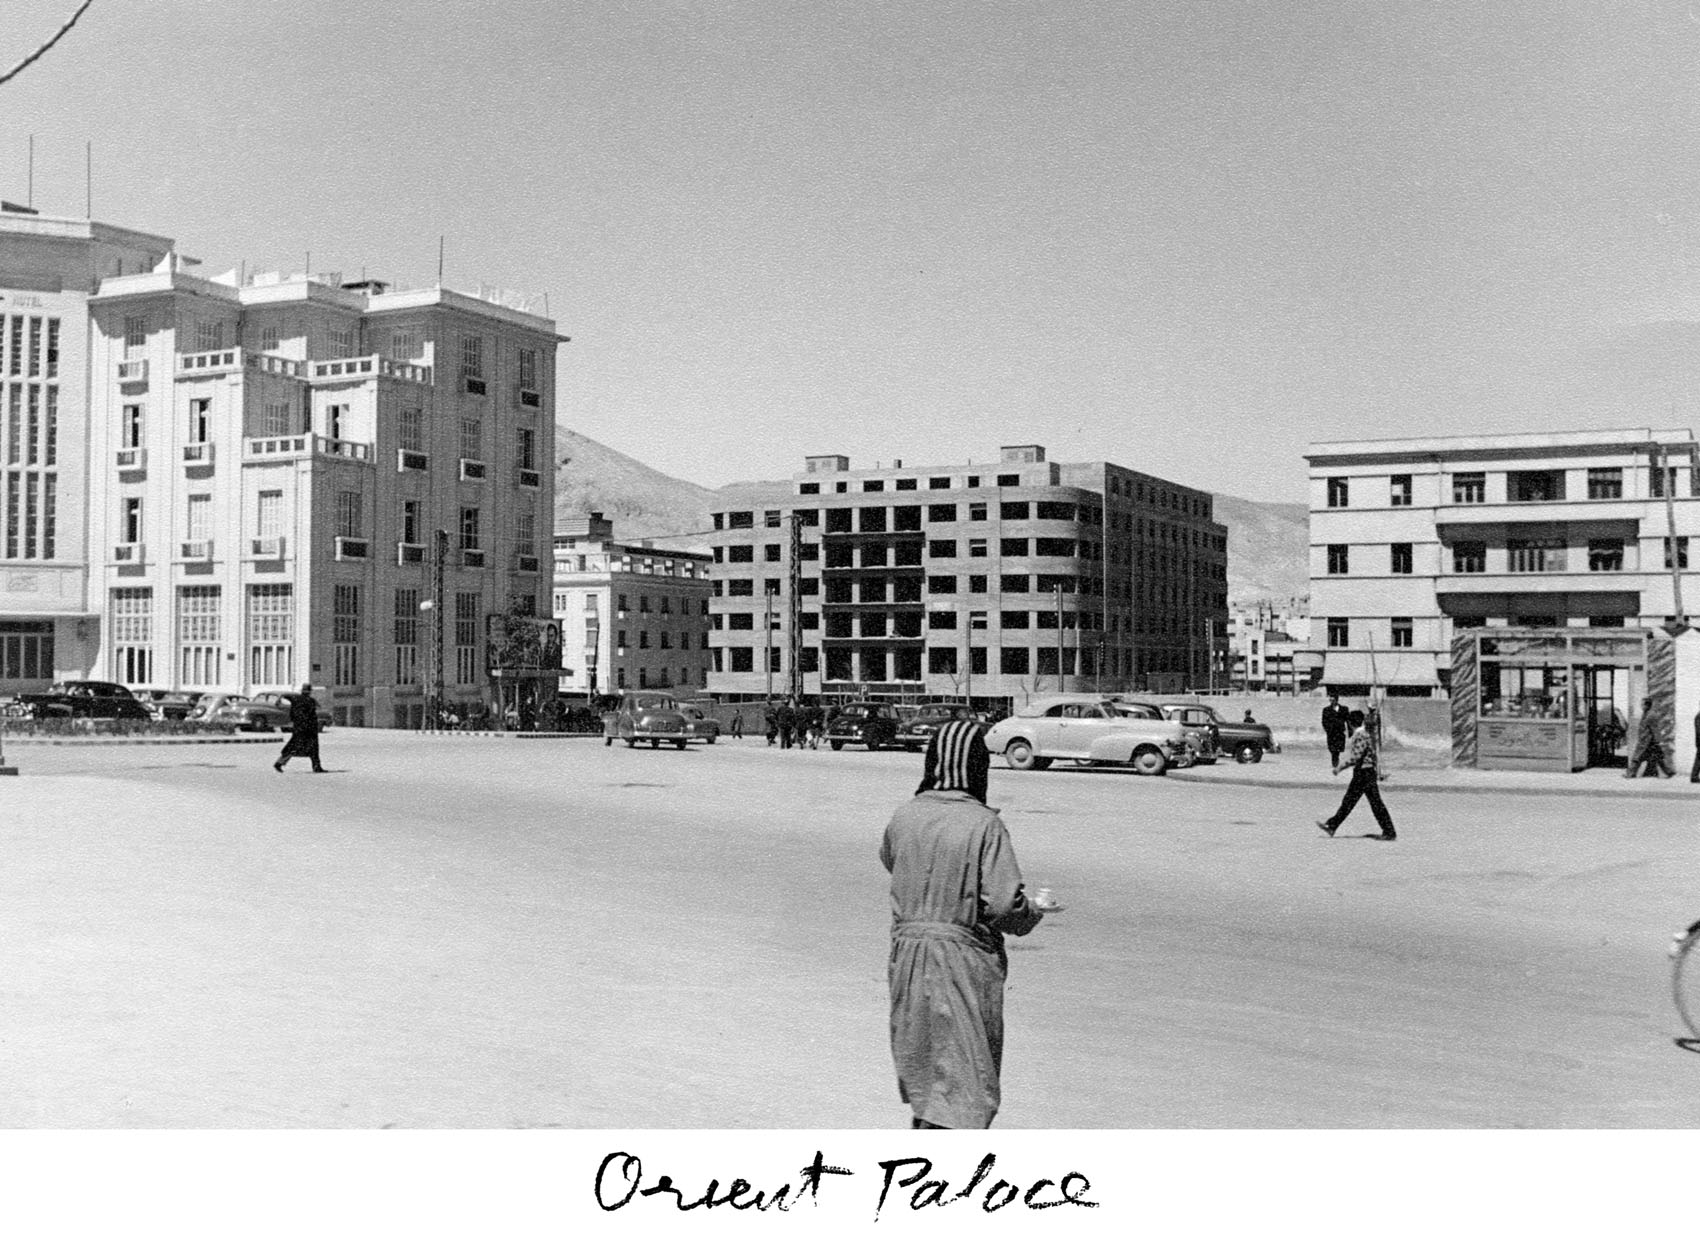 View of the public square in front of the Orient Hotel